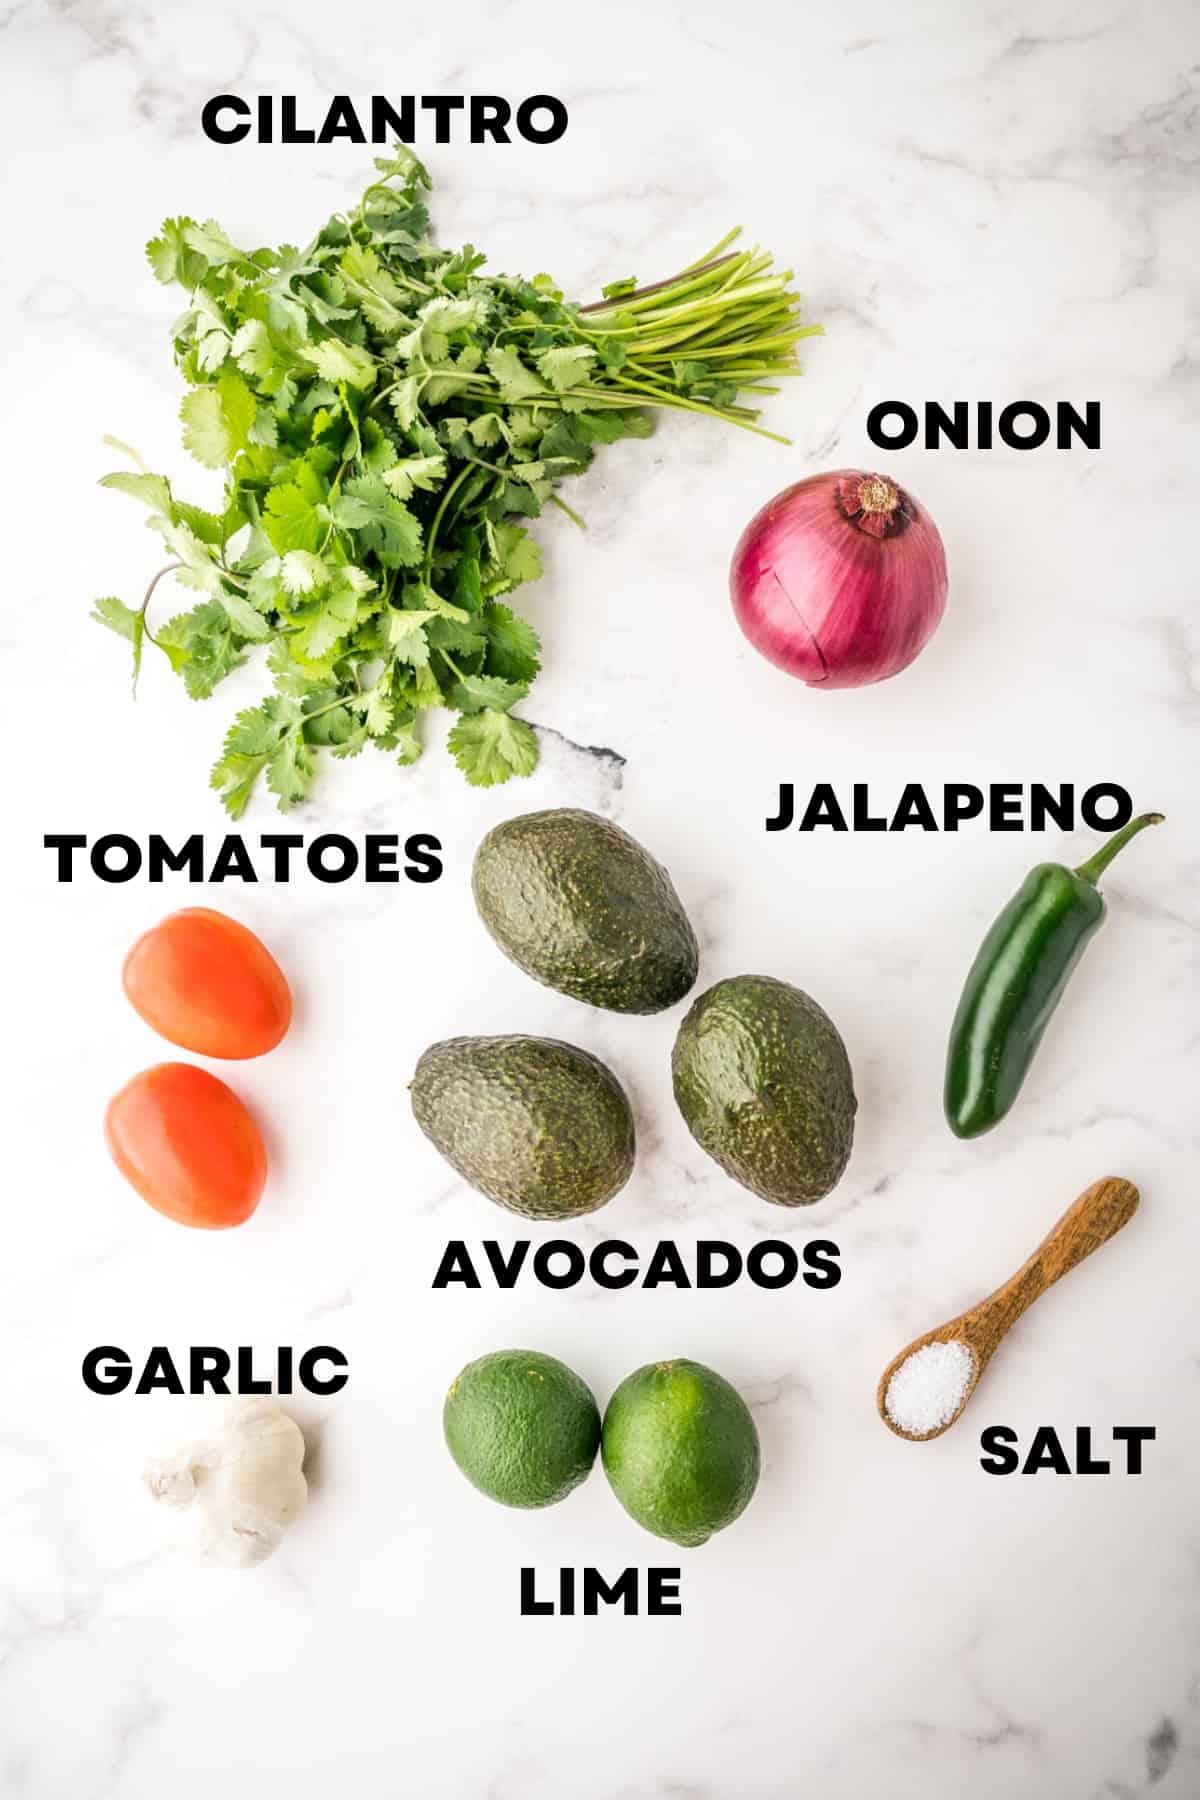 A labeled image of the ingredients needed to make guacamole.